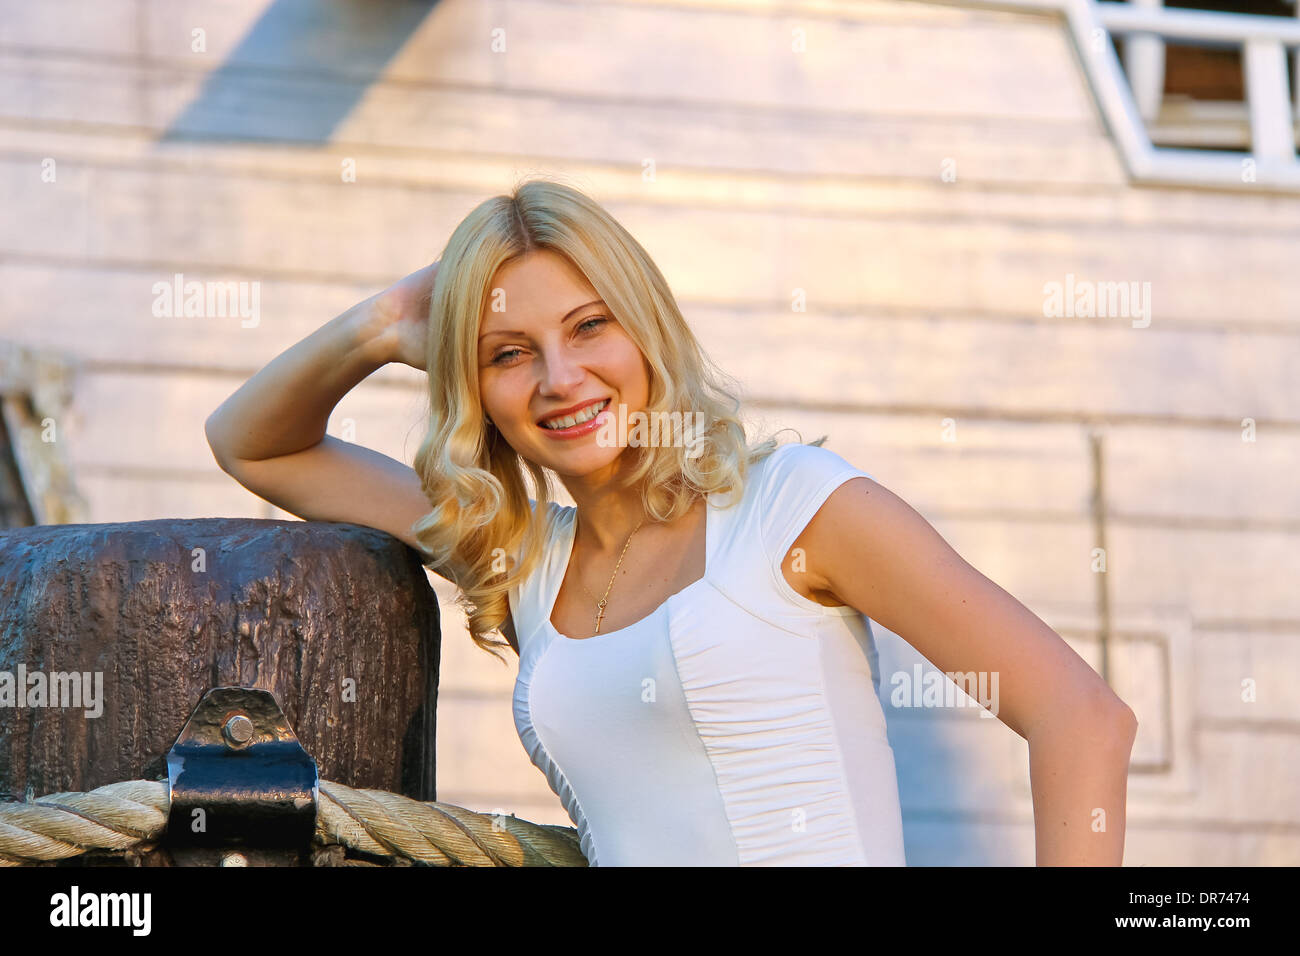 Vacation in Las Vegas. Girl on a background of a pirate ship Stock Photo